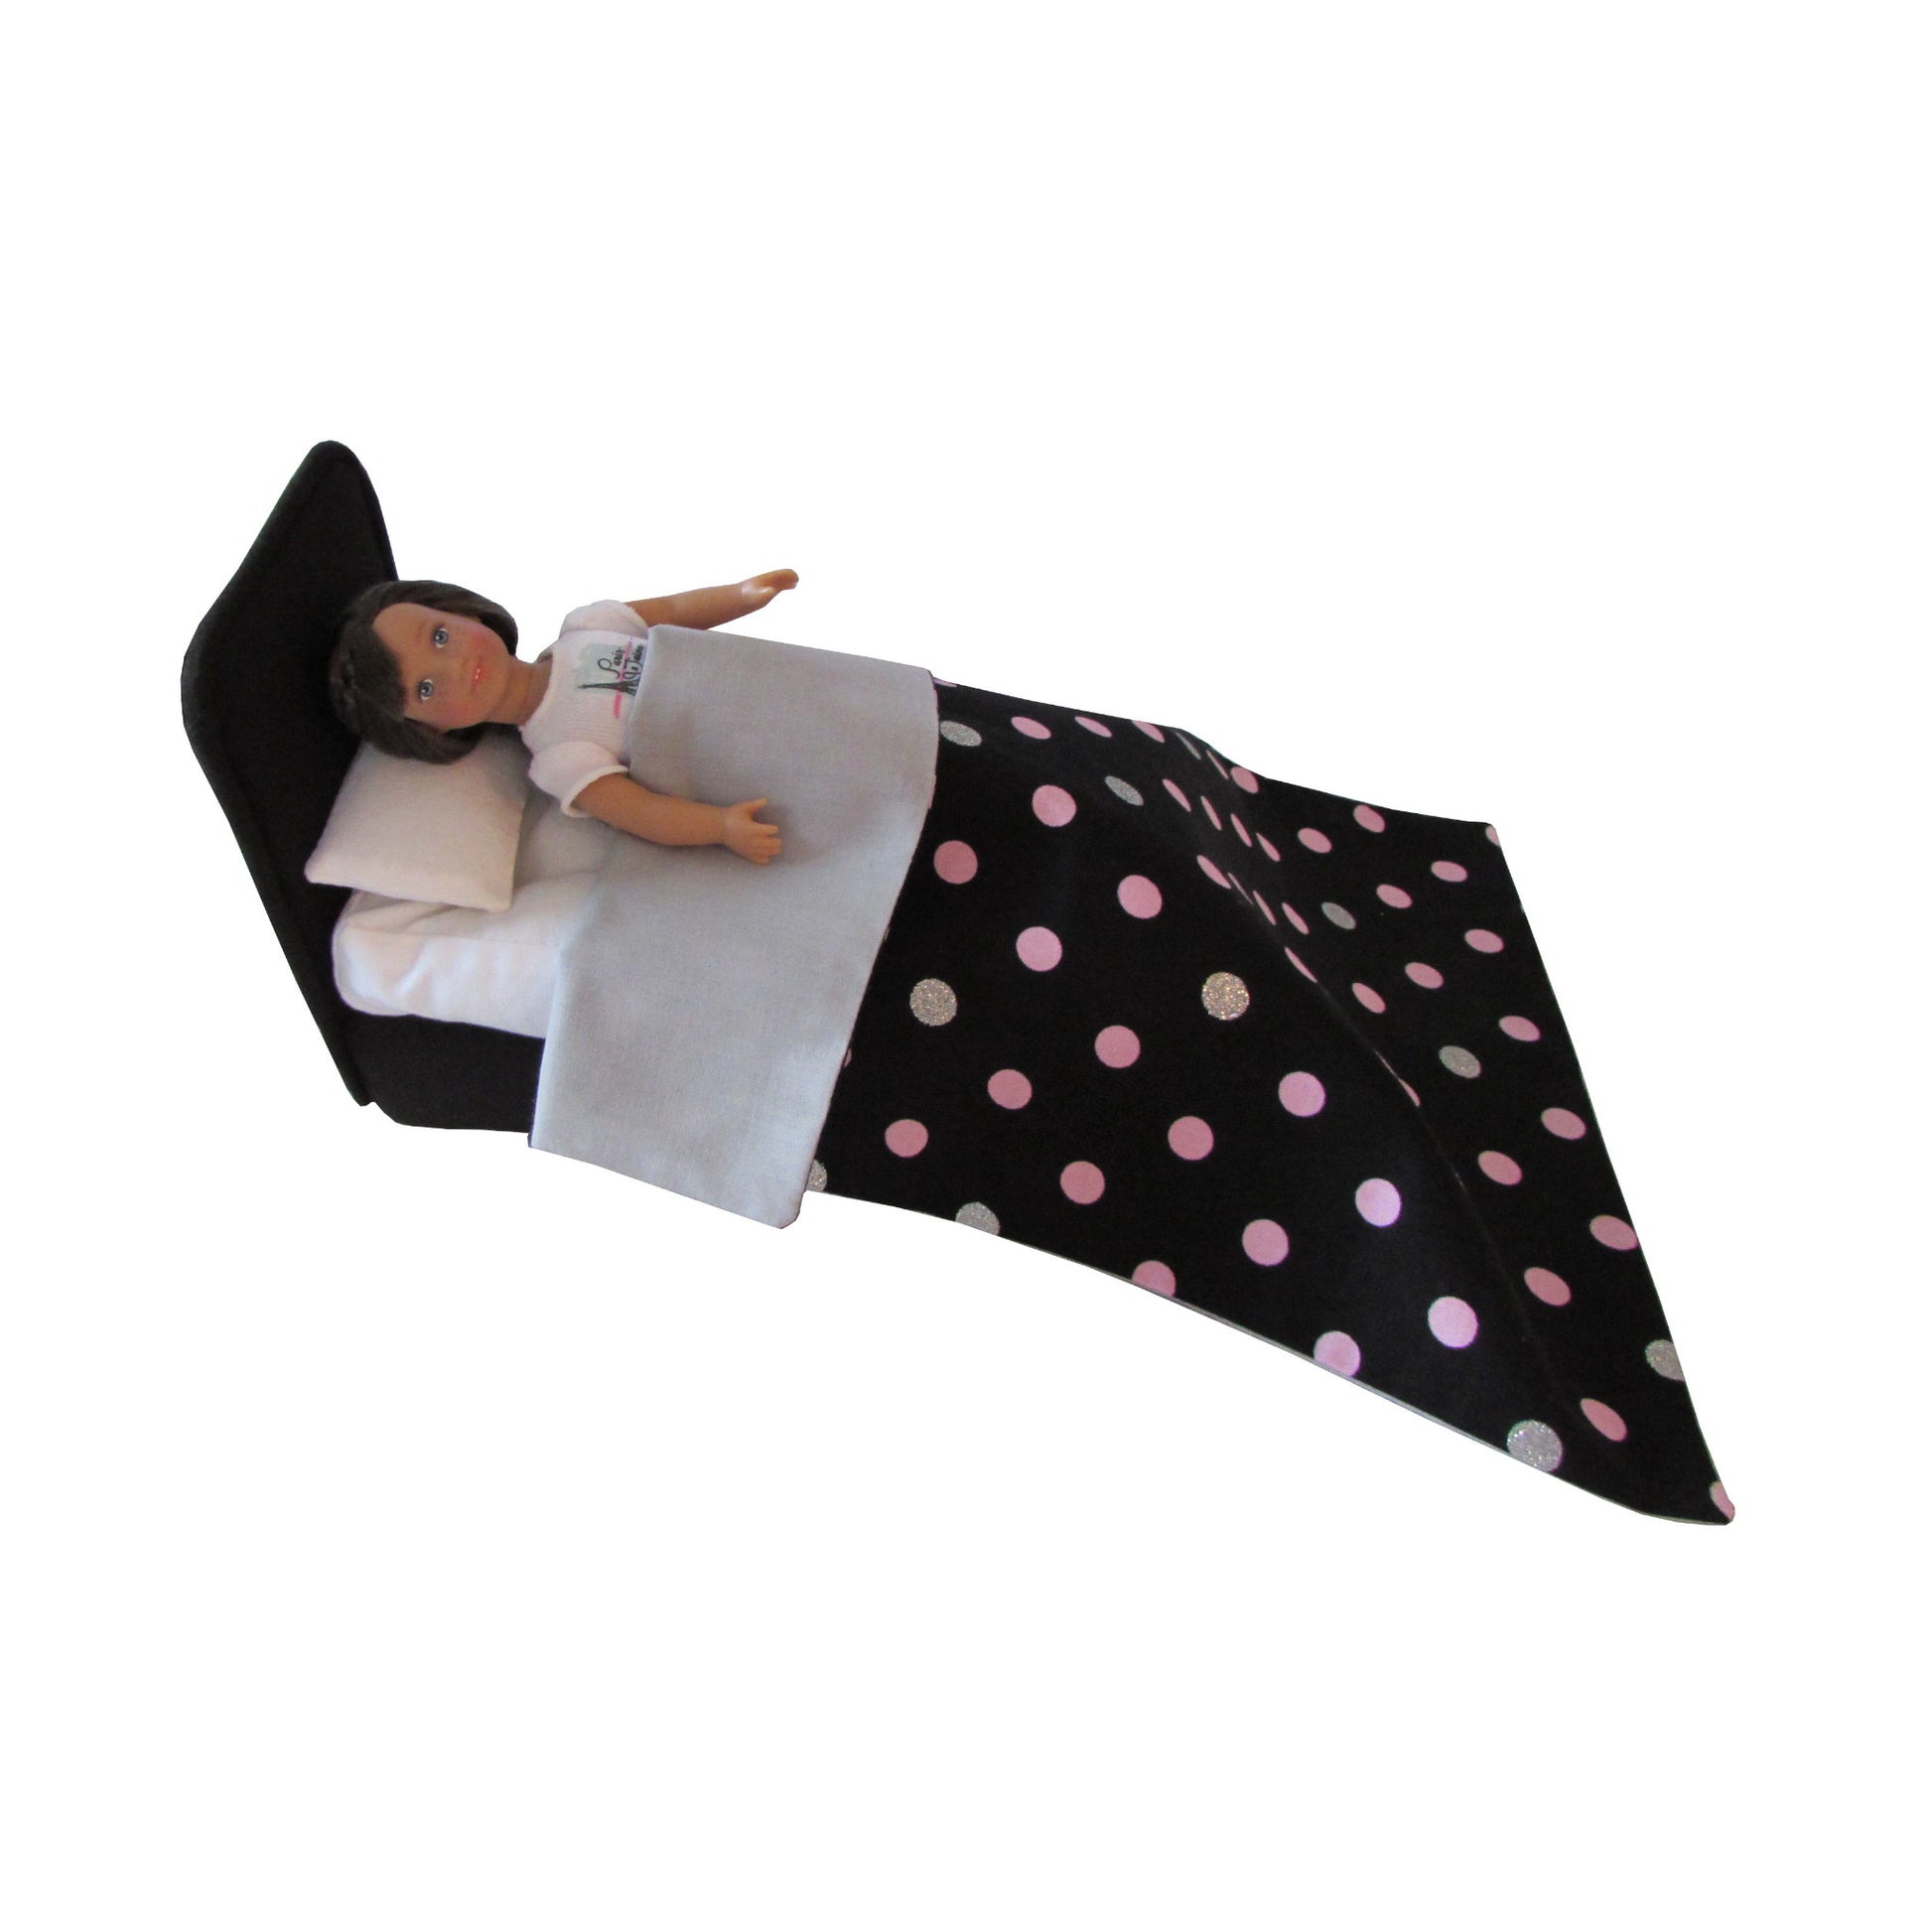 Black Doll Bed and Dots Doll Bedding for 6.5-inch dolls with doll Second view